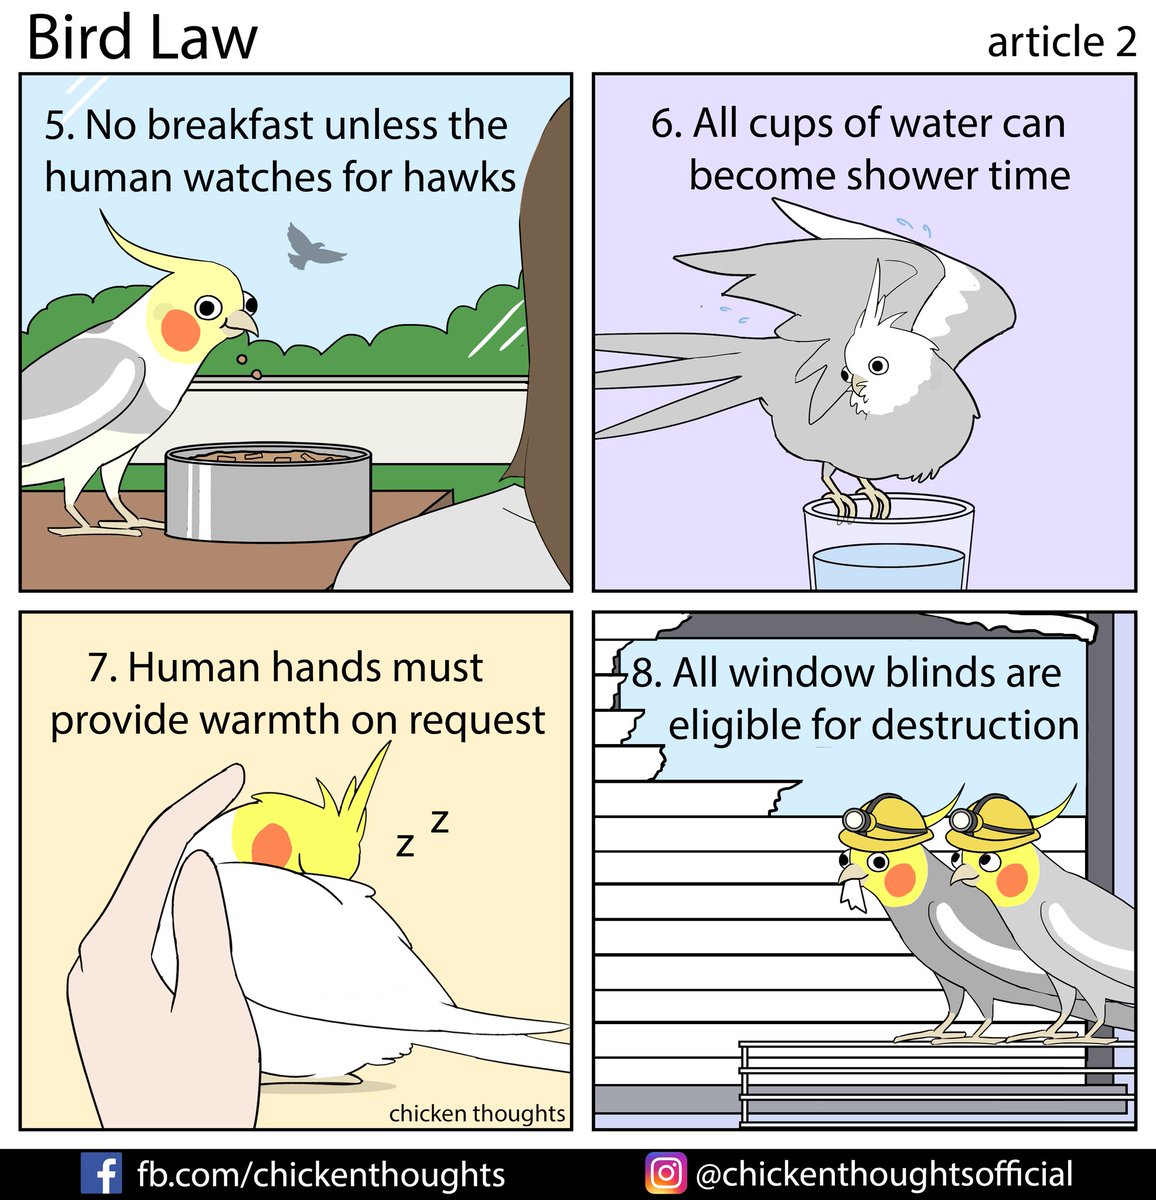 Bird Law article 2 starring Navarro, @kiwimoontiel (Instagram), Kiwi, and Kevin & Pippin. Submissions open, check my previous tweets for details.